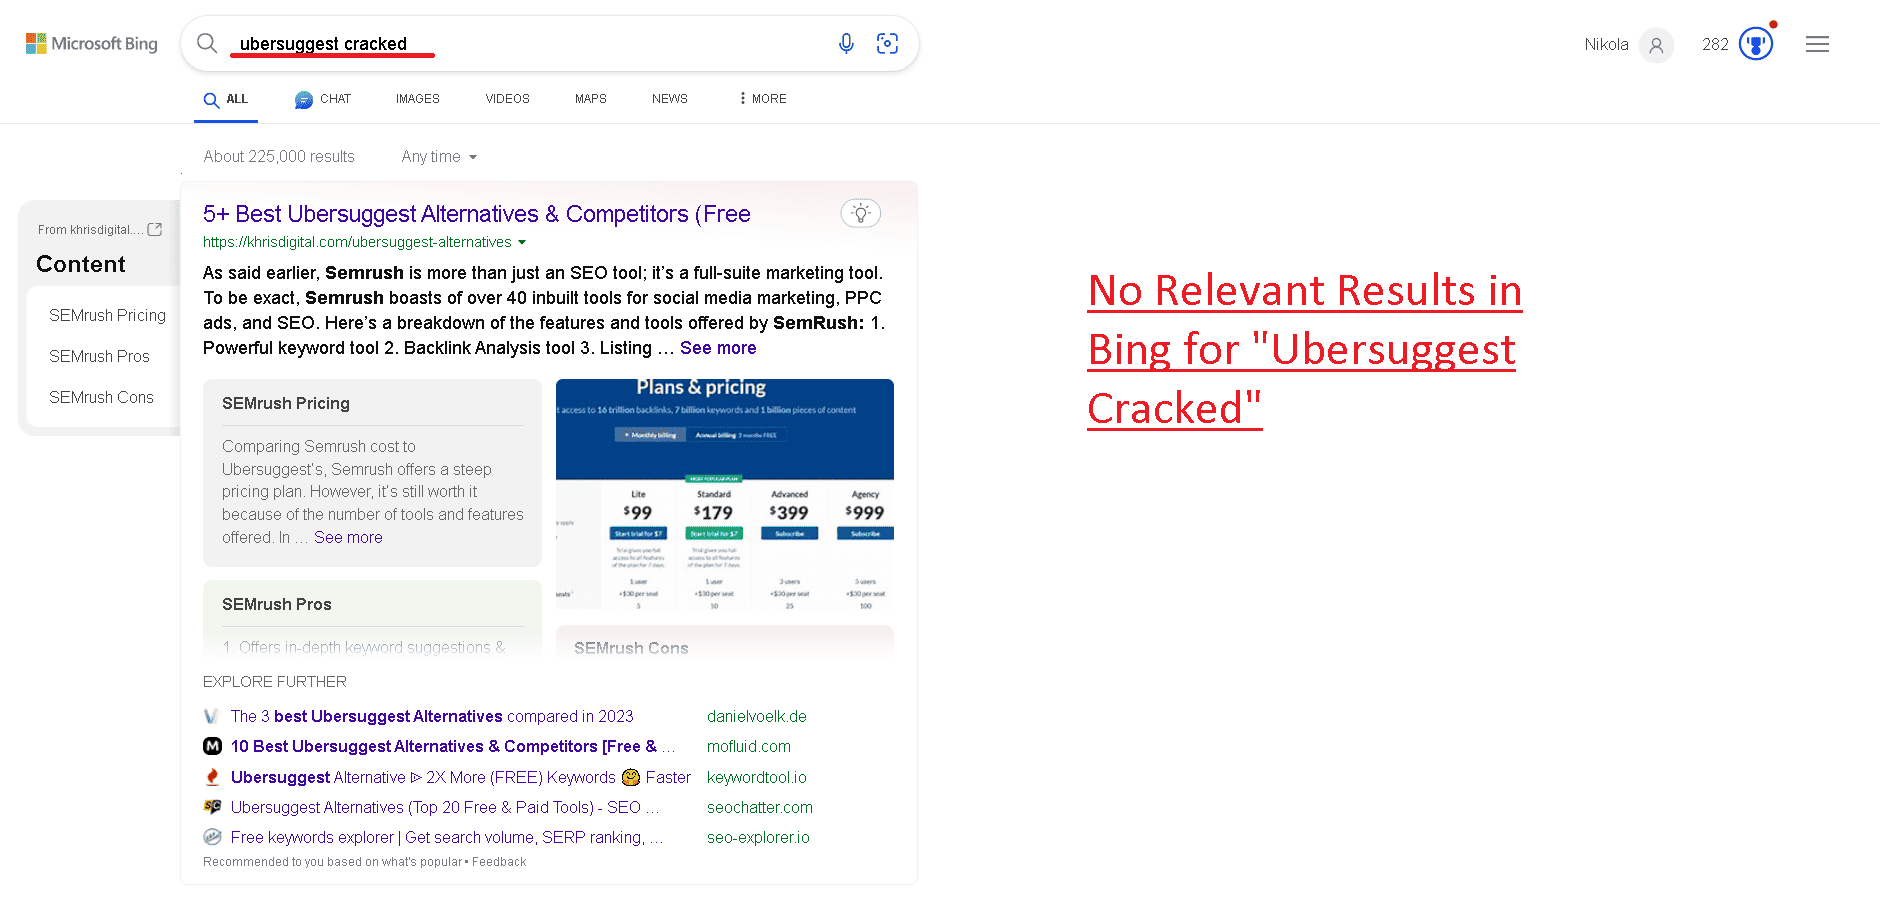 "Ubersuggest cracked" query in Bing shows no good results